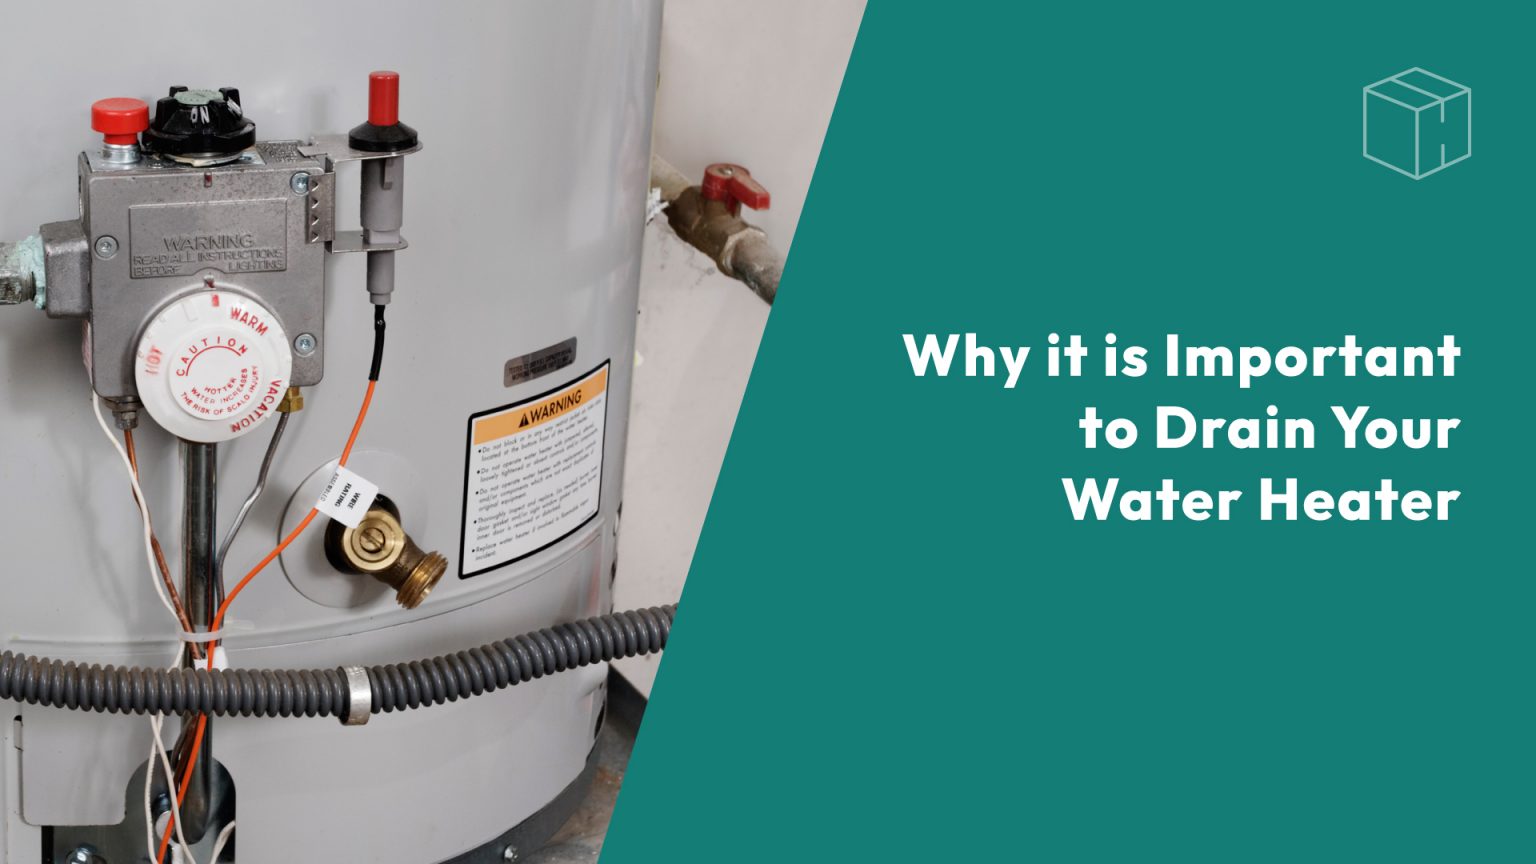 Why it is Important to Drain Your Water Heater